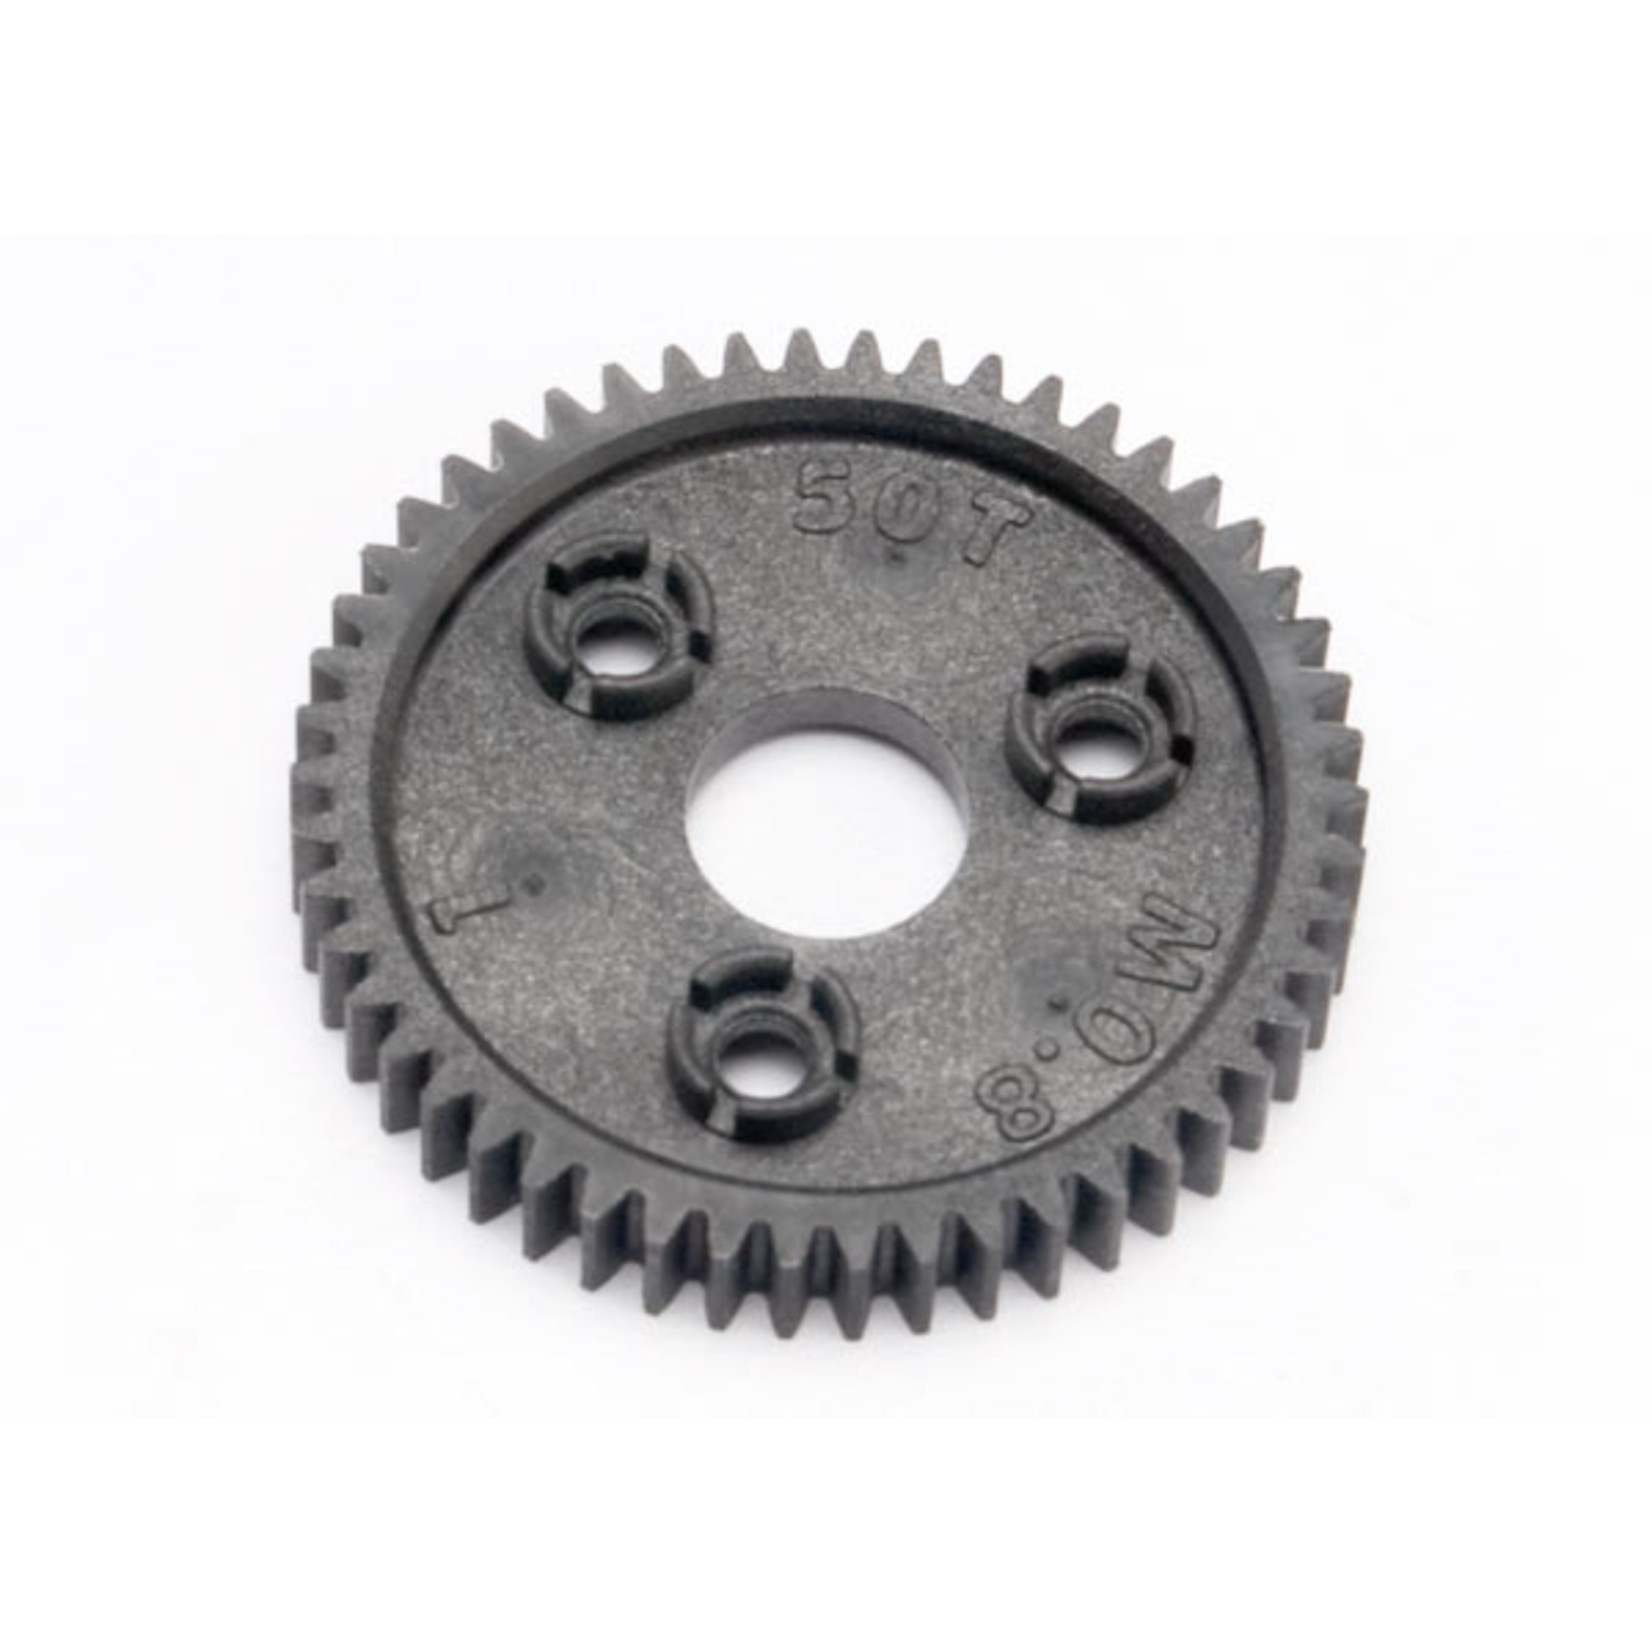 Traxxas 6842 - Spur gear, 50-tooth (0.8 metric pitch, comp